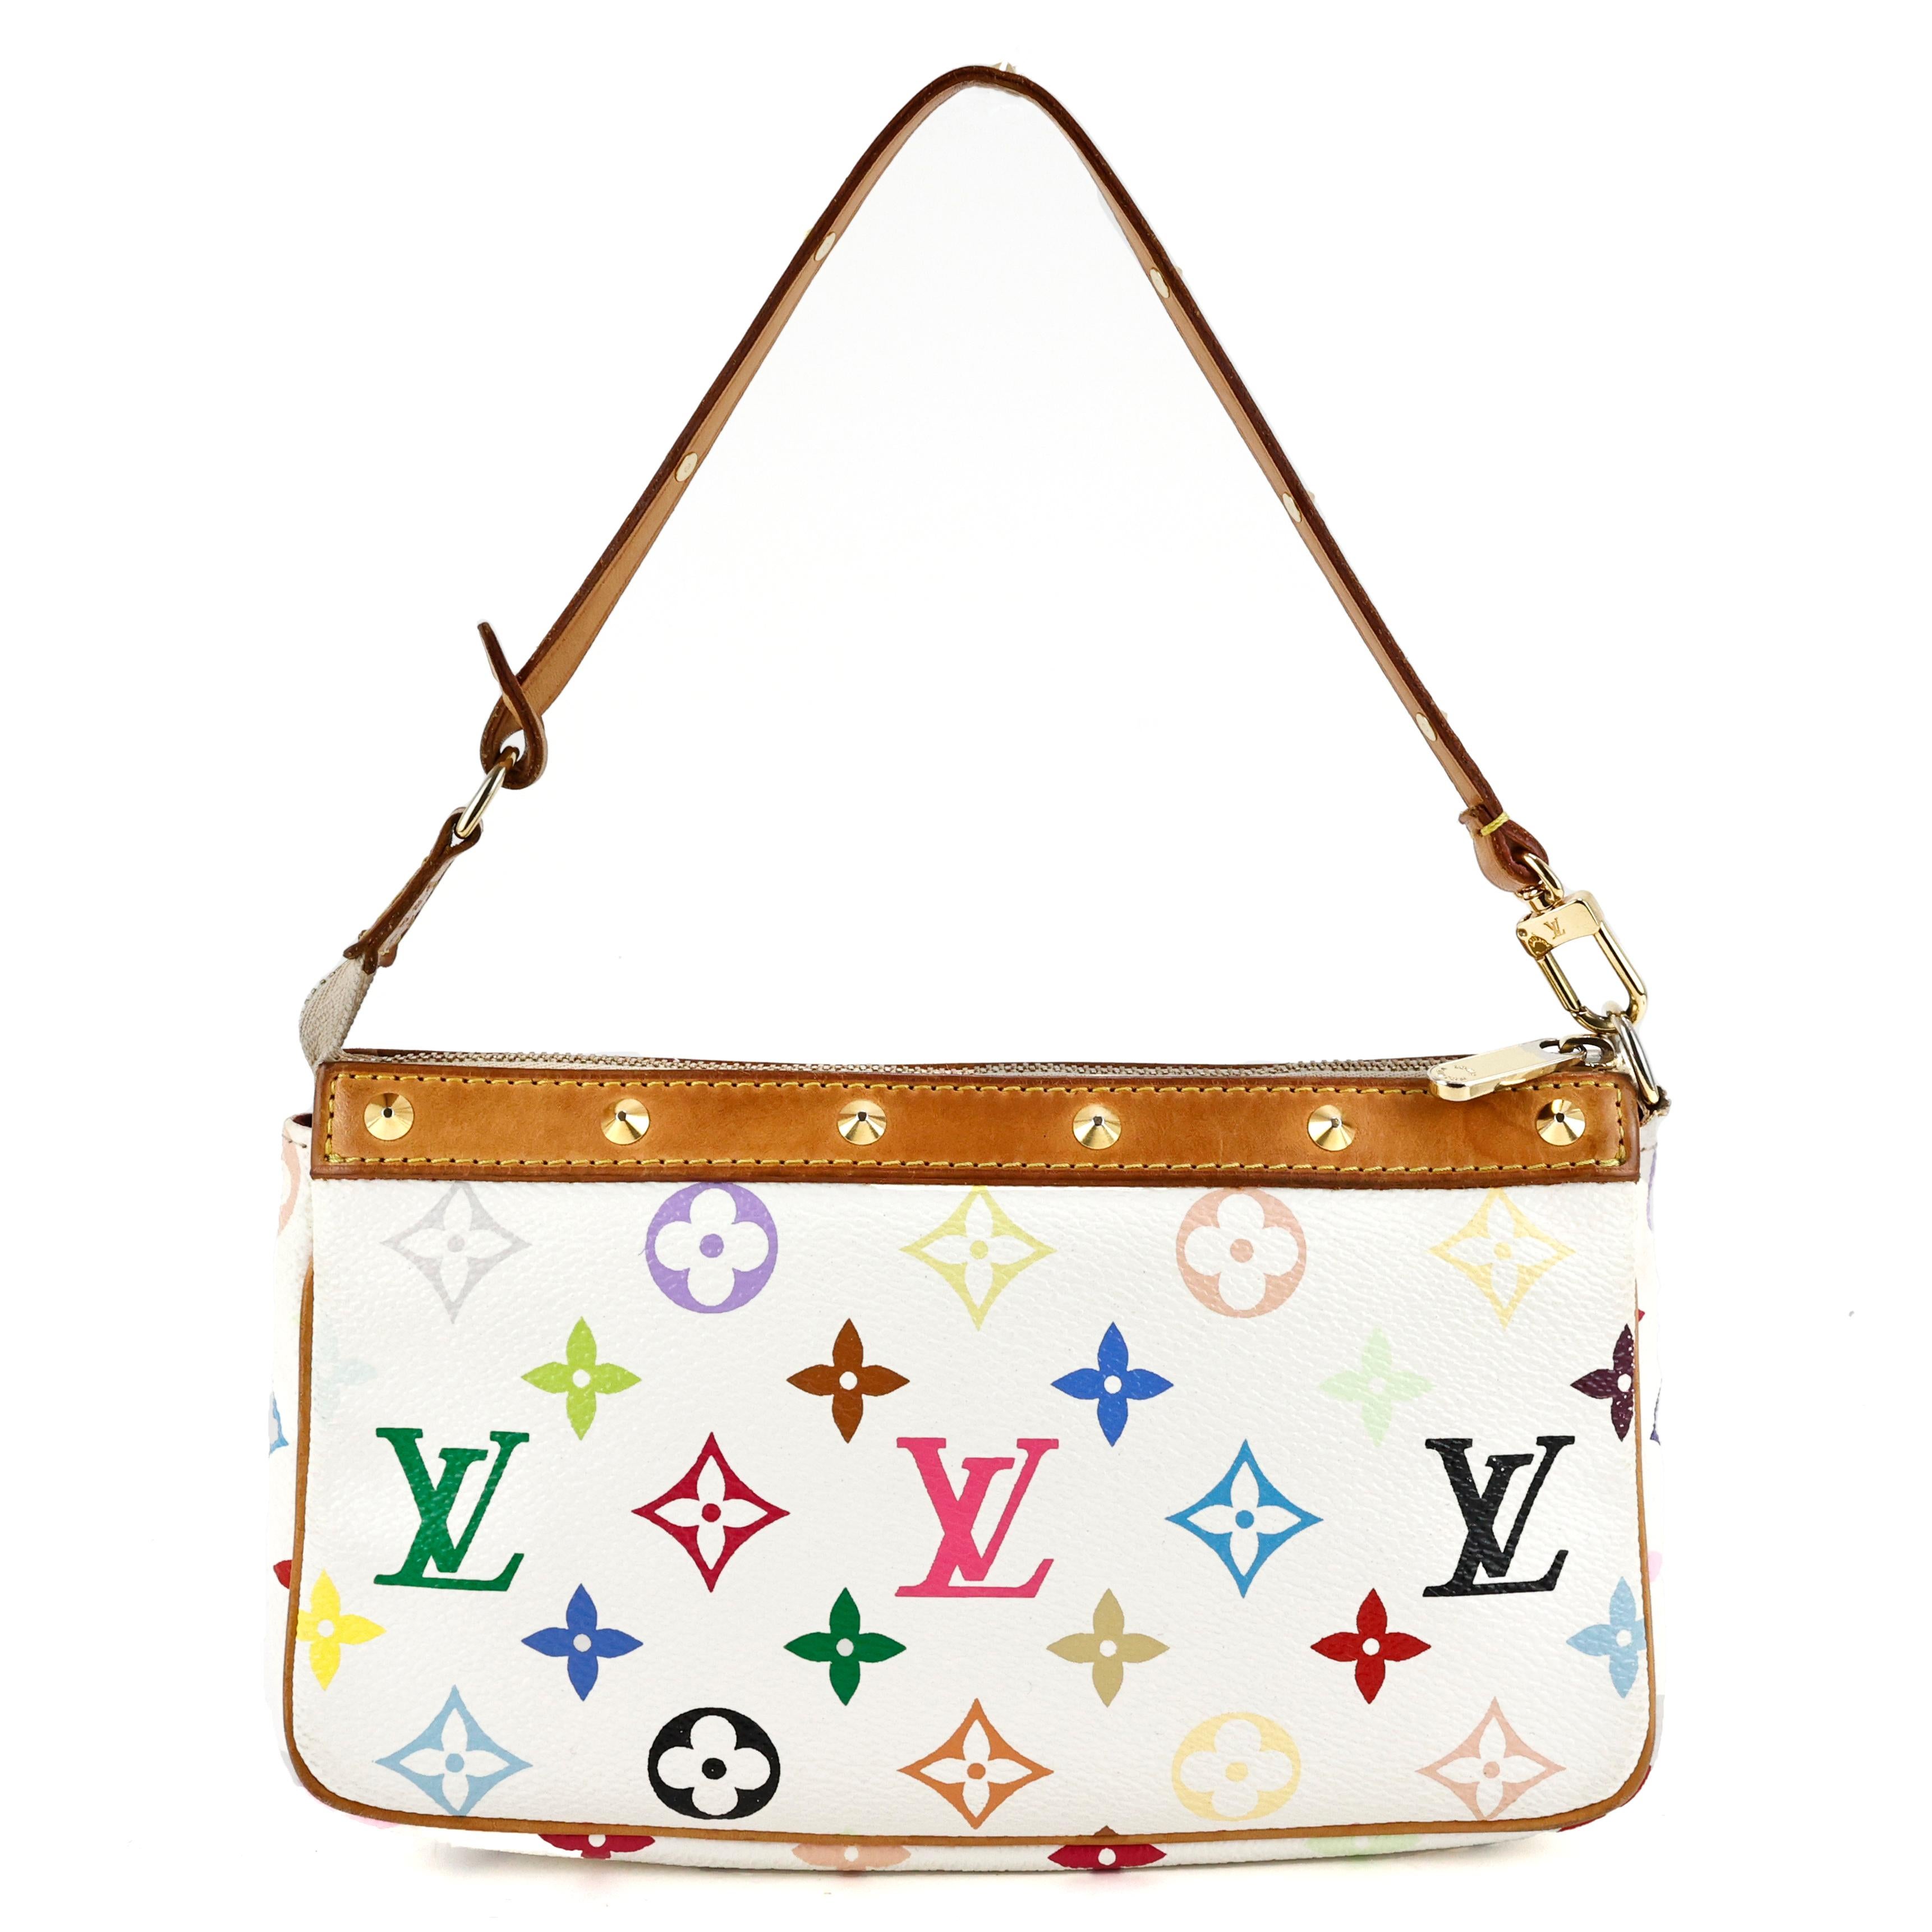 Louis Vuitton Takashi Murakami Pochette Acccessoire in multicolore monogram canvas + beige leather, gold hardware.

Condition:
Really good.

Packing/accessories:
Box and dustbag.

Measurements:
21cm x 12cm x 4cm